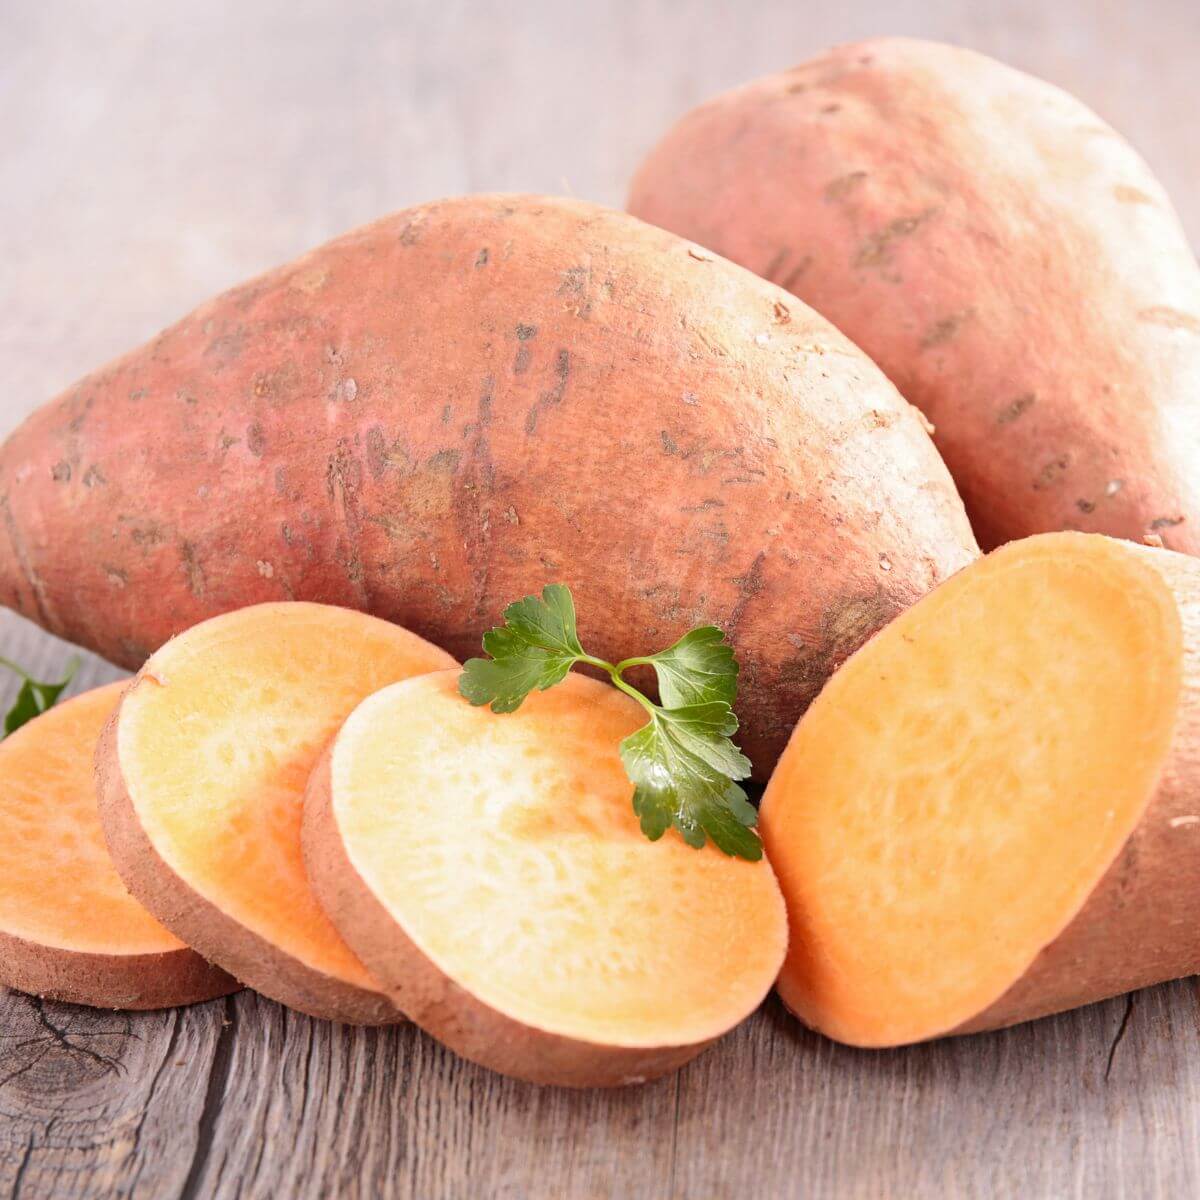 Nutrition, Health, and Beauty Benefits of Sweet Potatoes